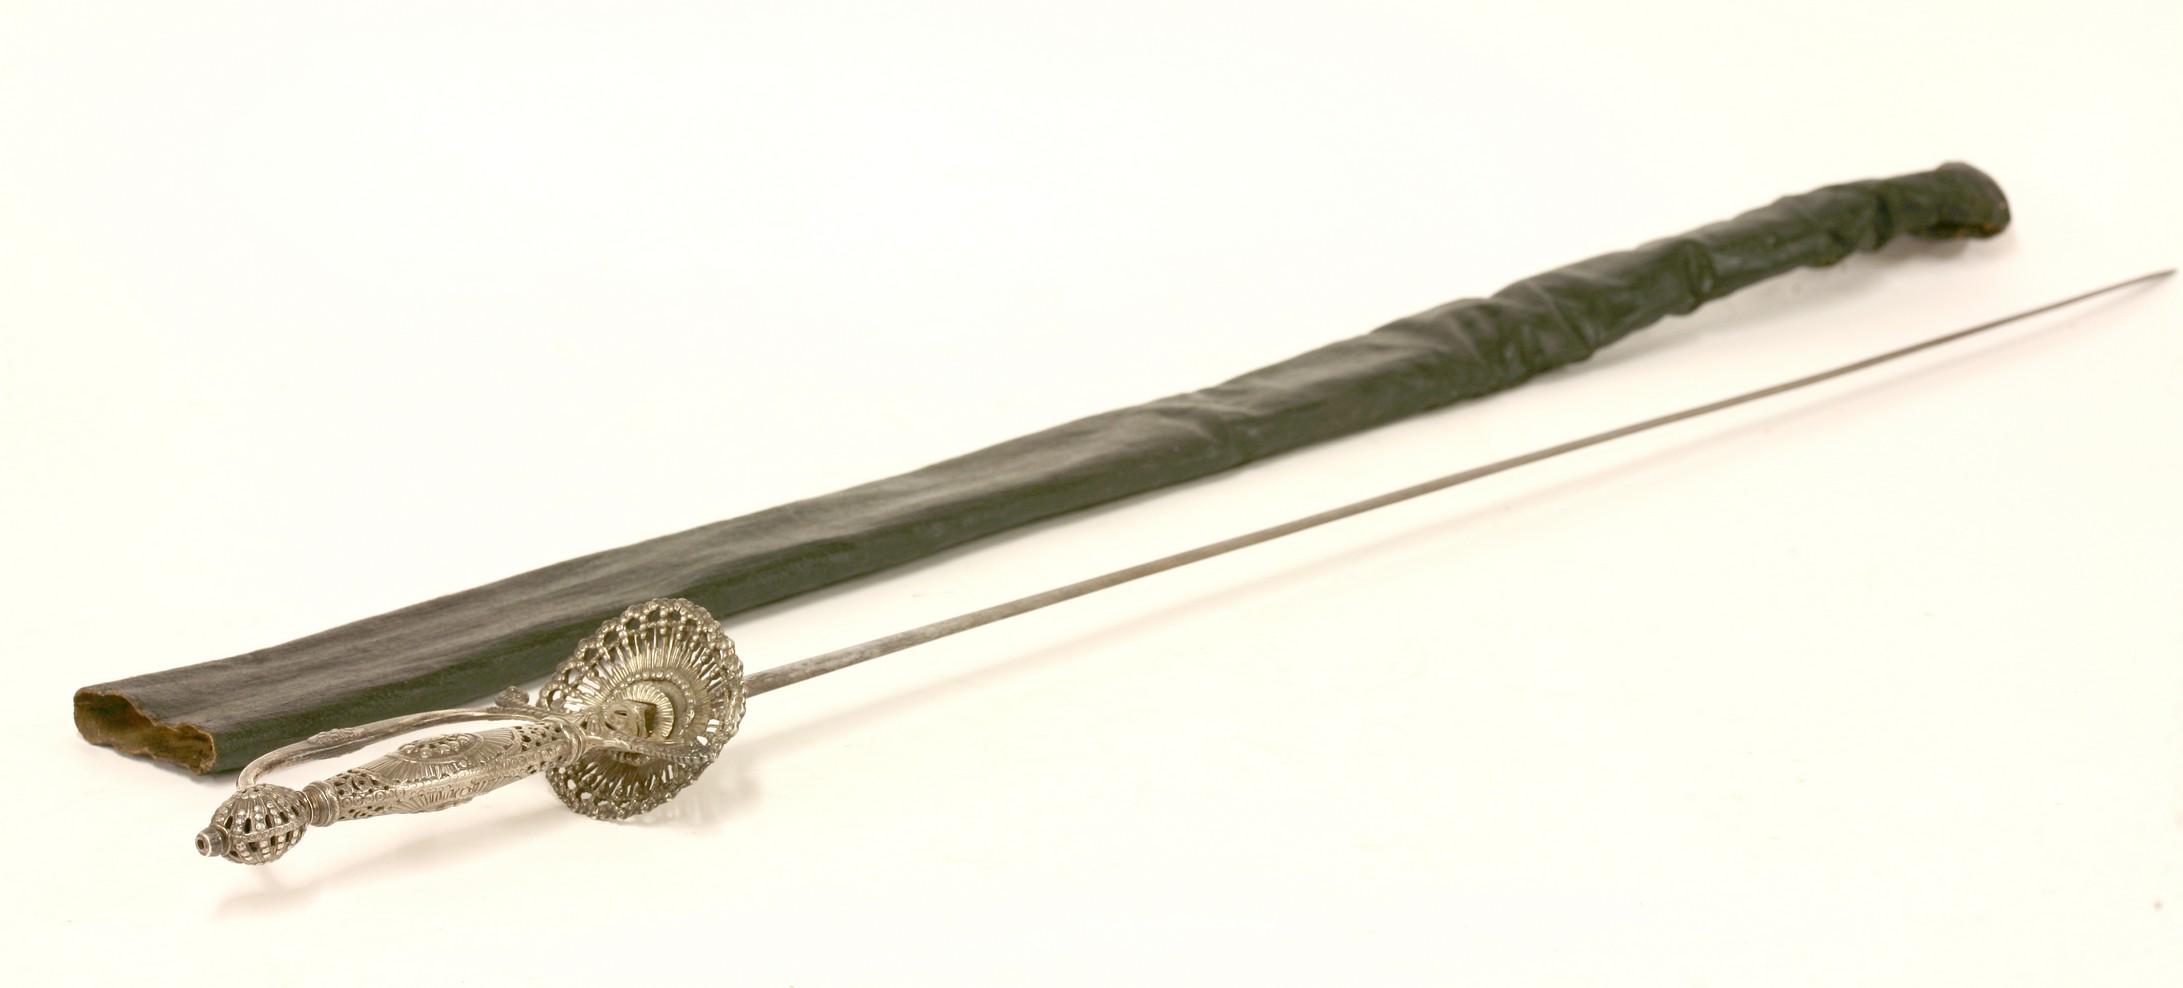 A French sword,
with silver hilt, probably Paris, 1775,
92cm long